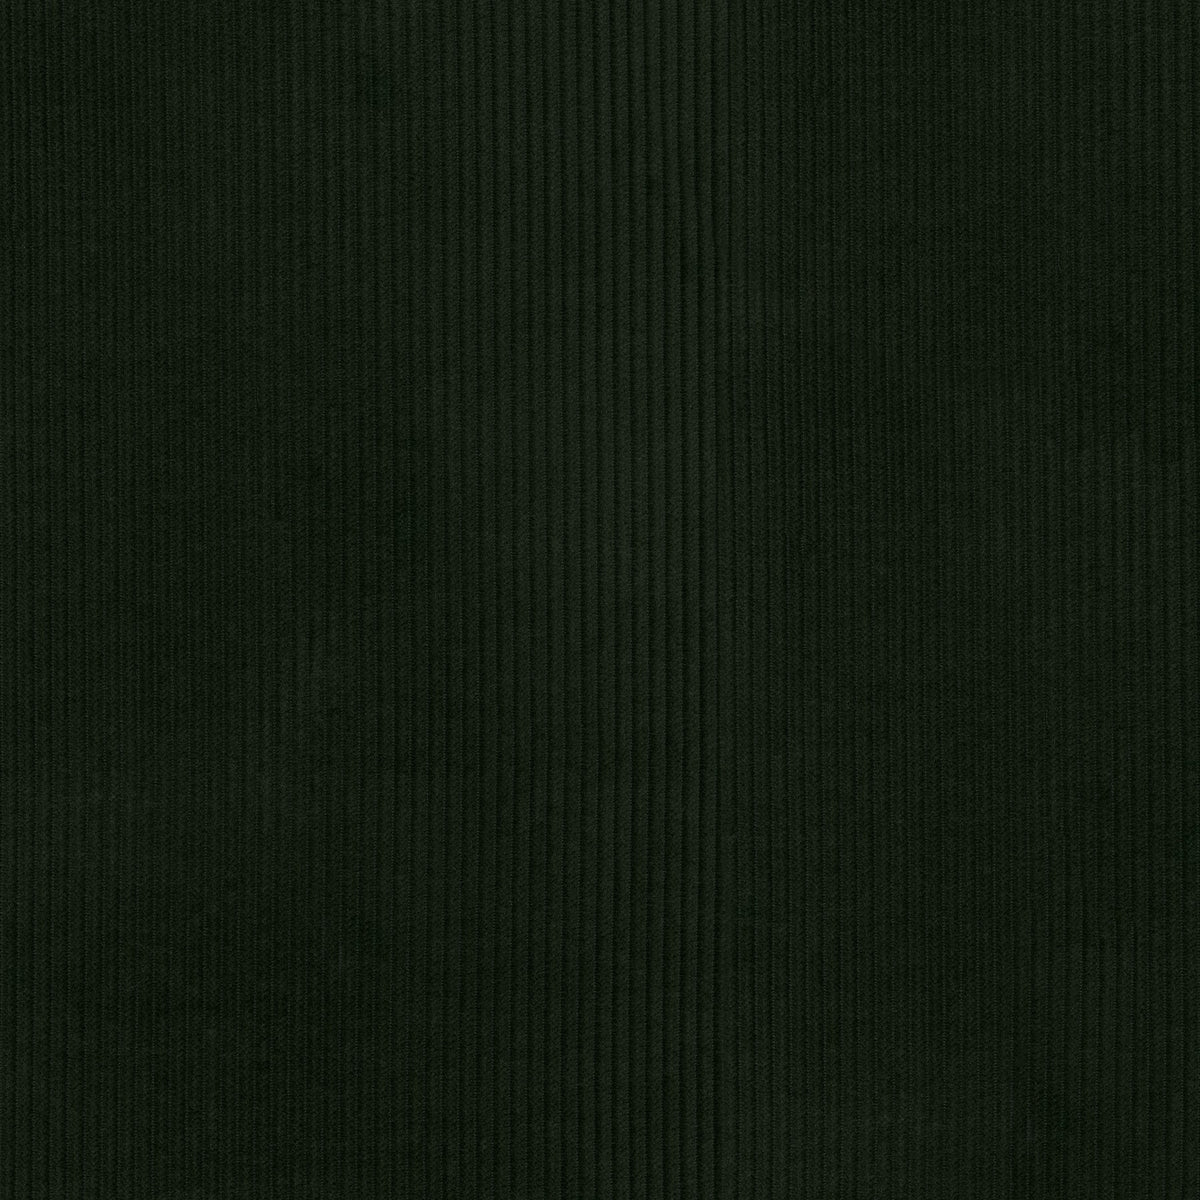 P/K Lifestyles Wales - Loden 412022 Fabric Swatch